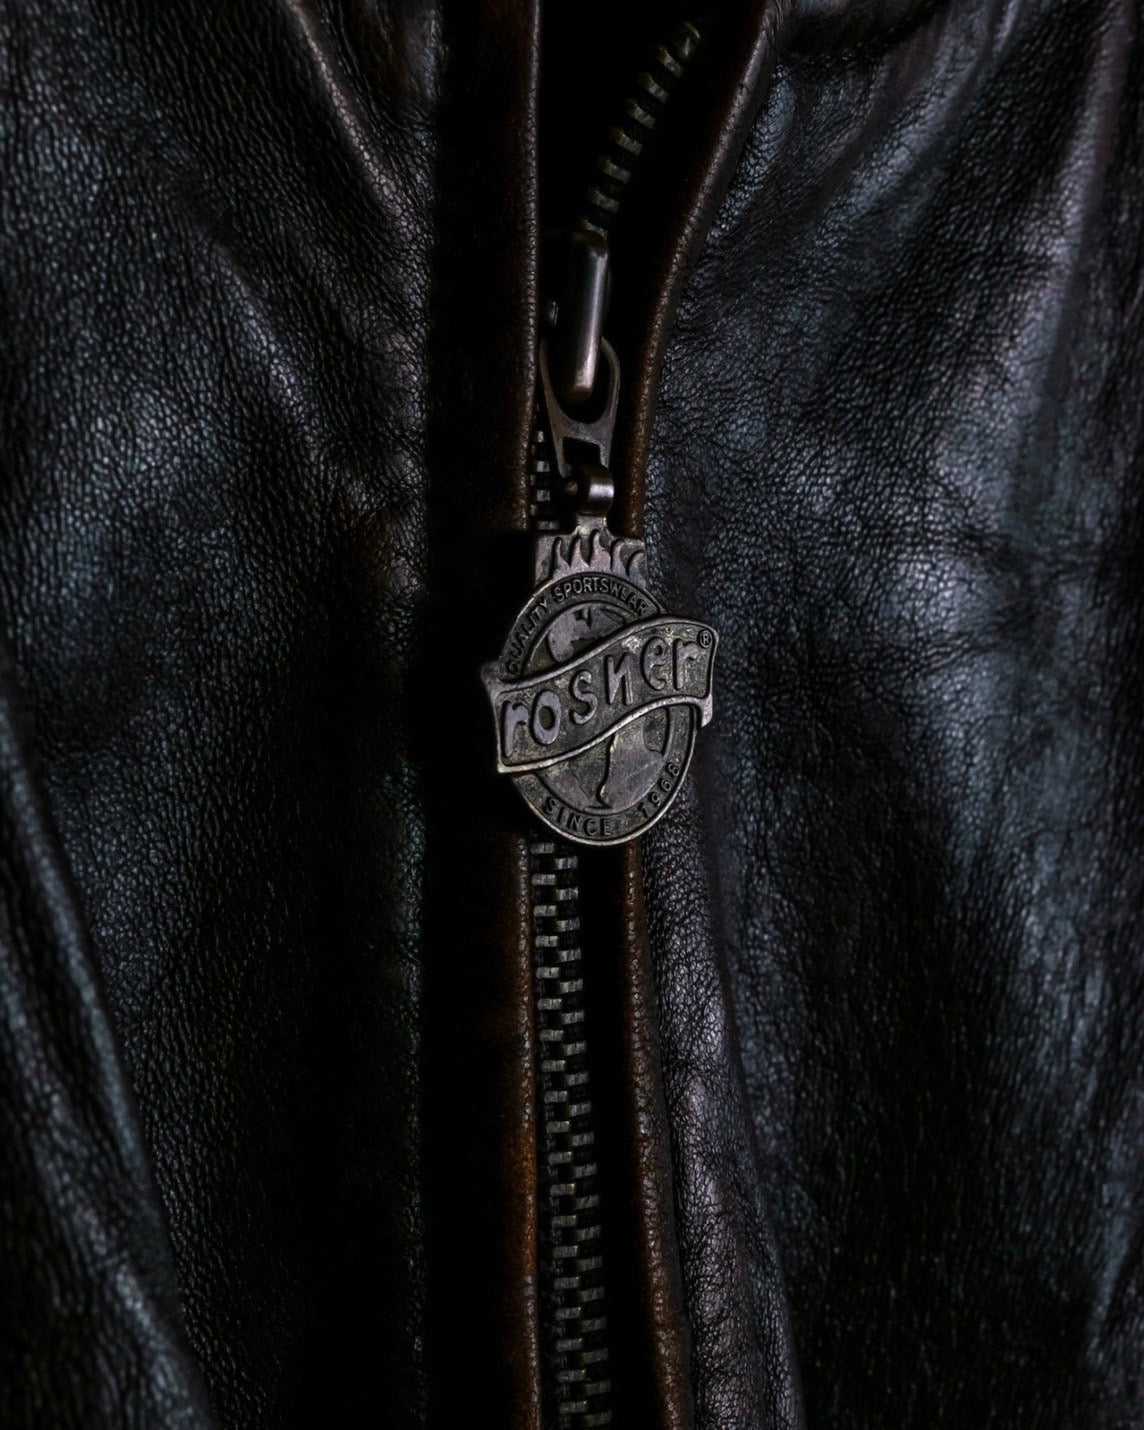 "MOOD SPECIAL" Super Aging Leather Blouson